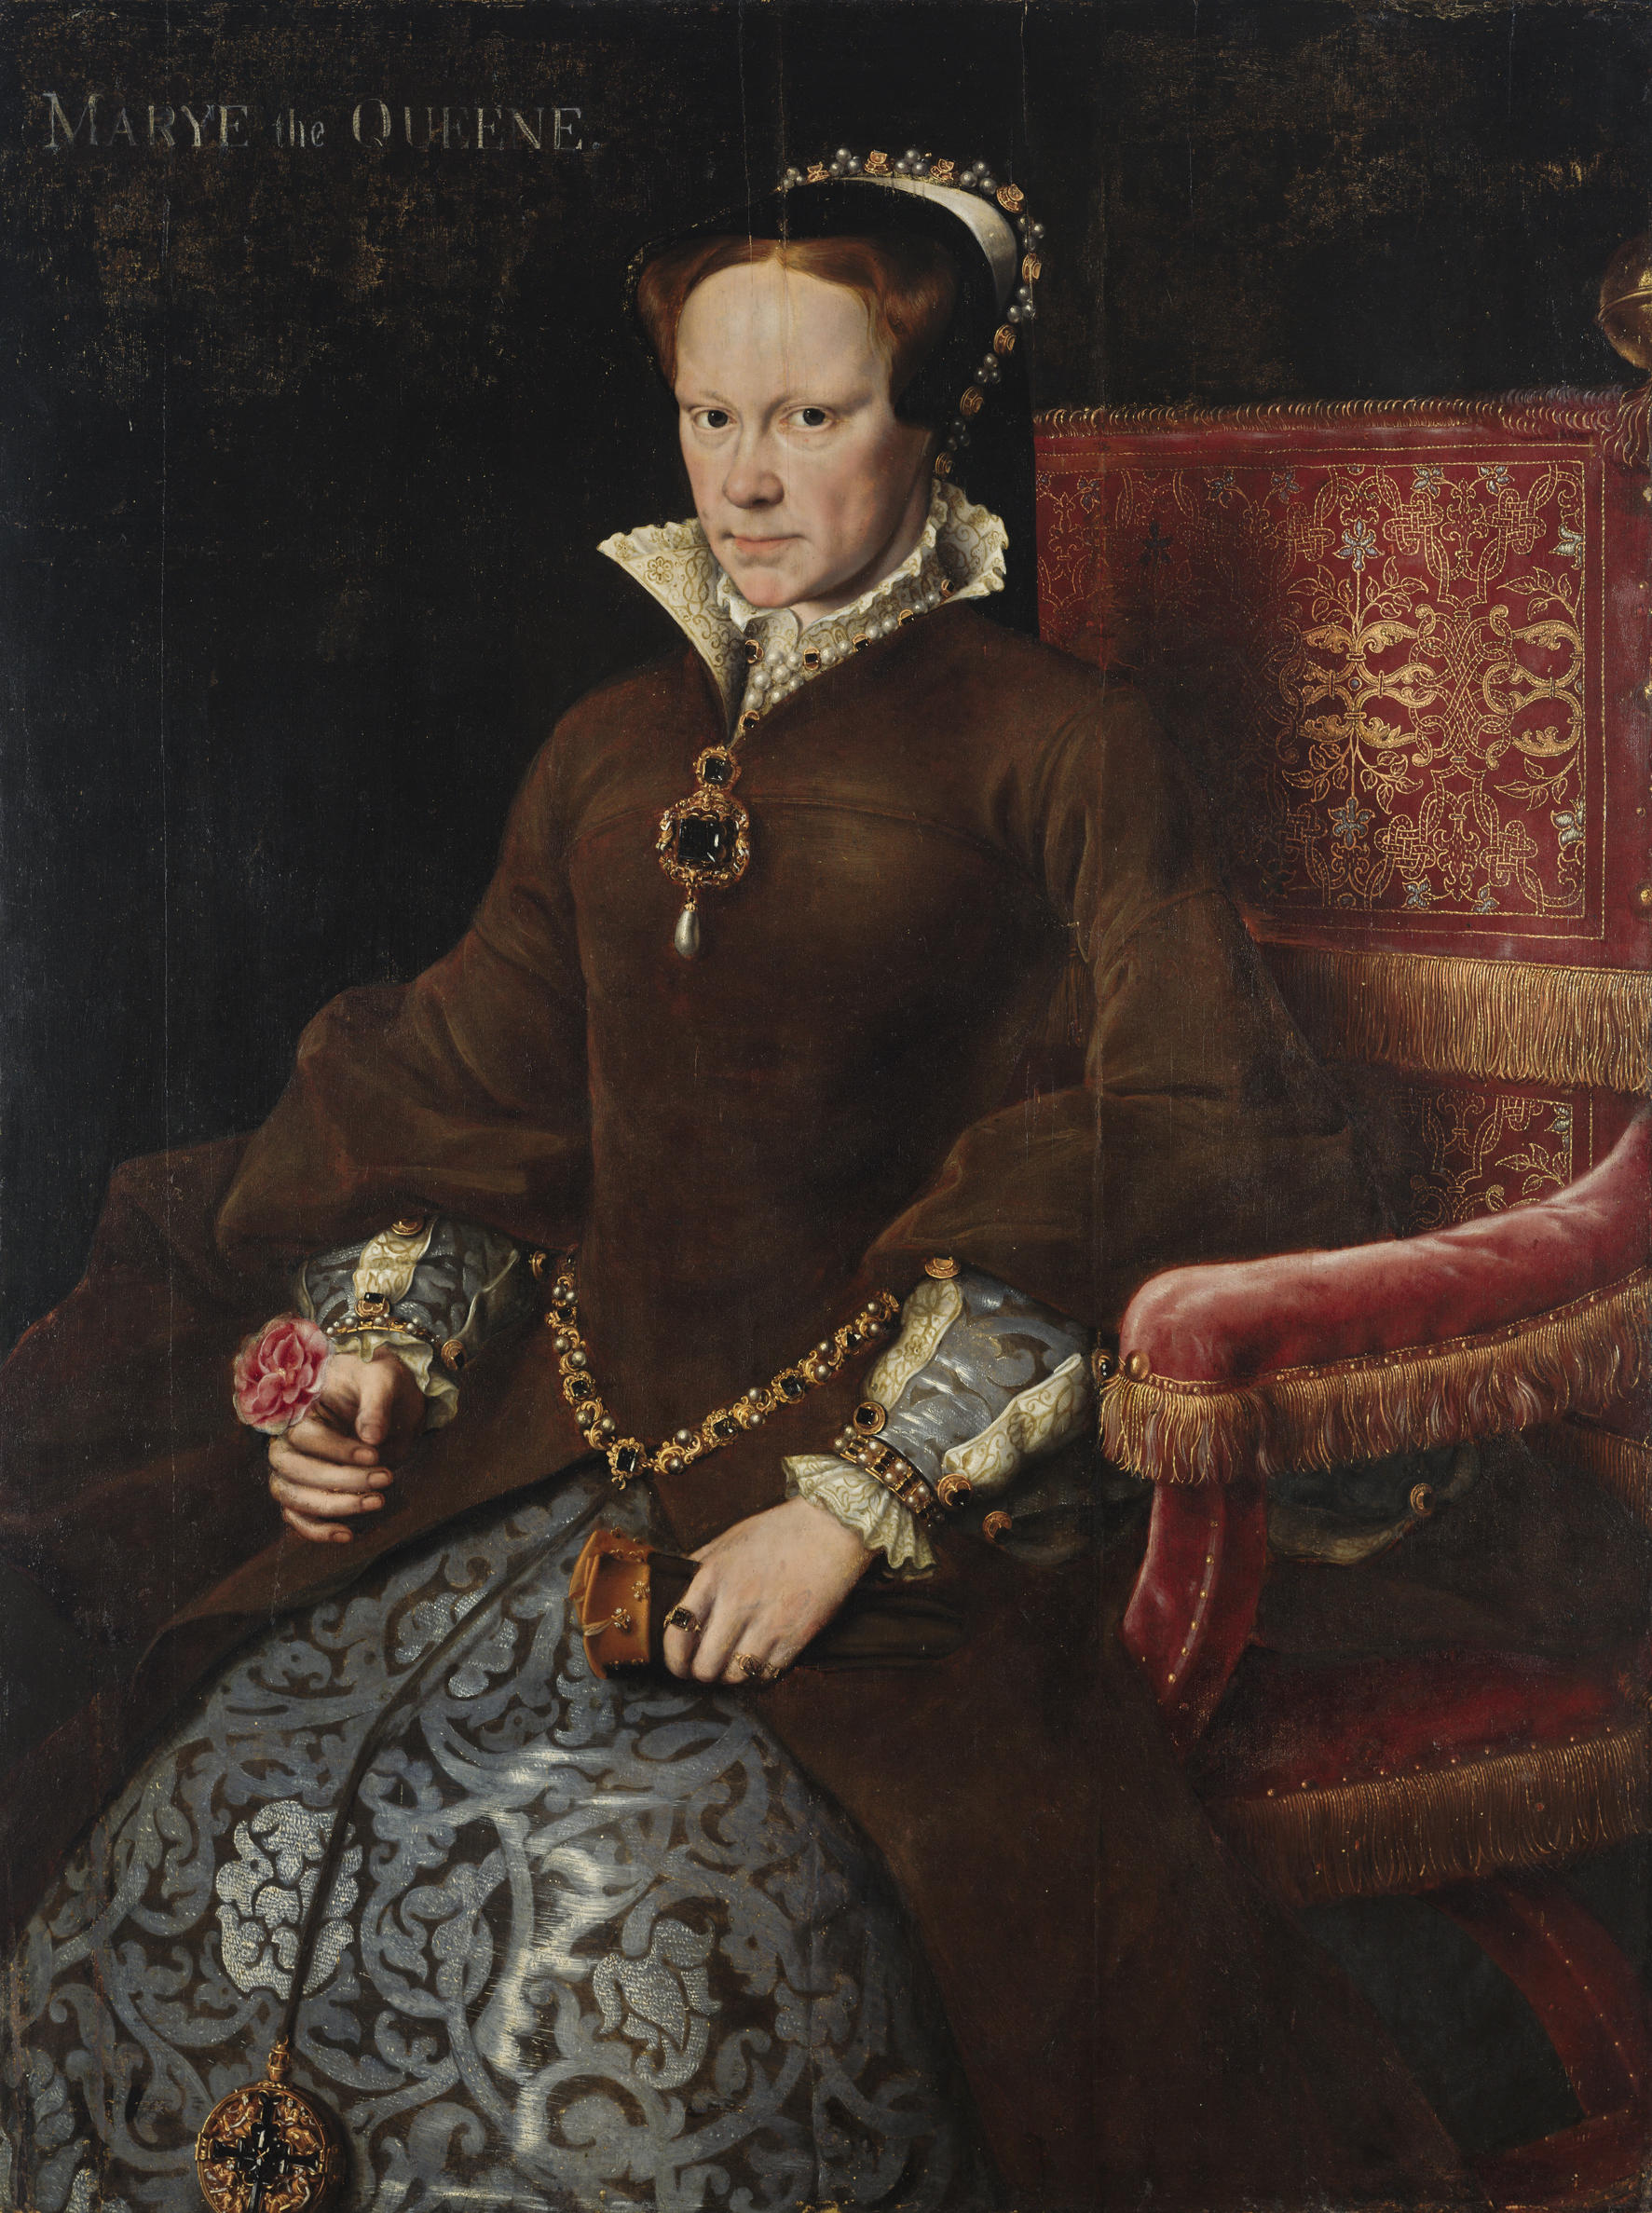 A portrait of Queen Mary I. 